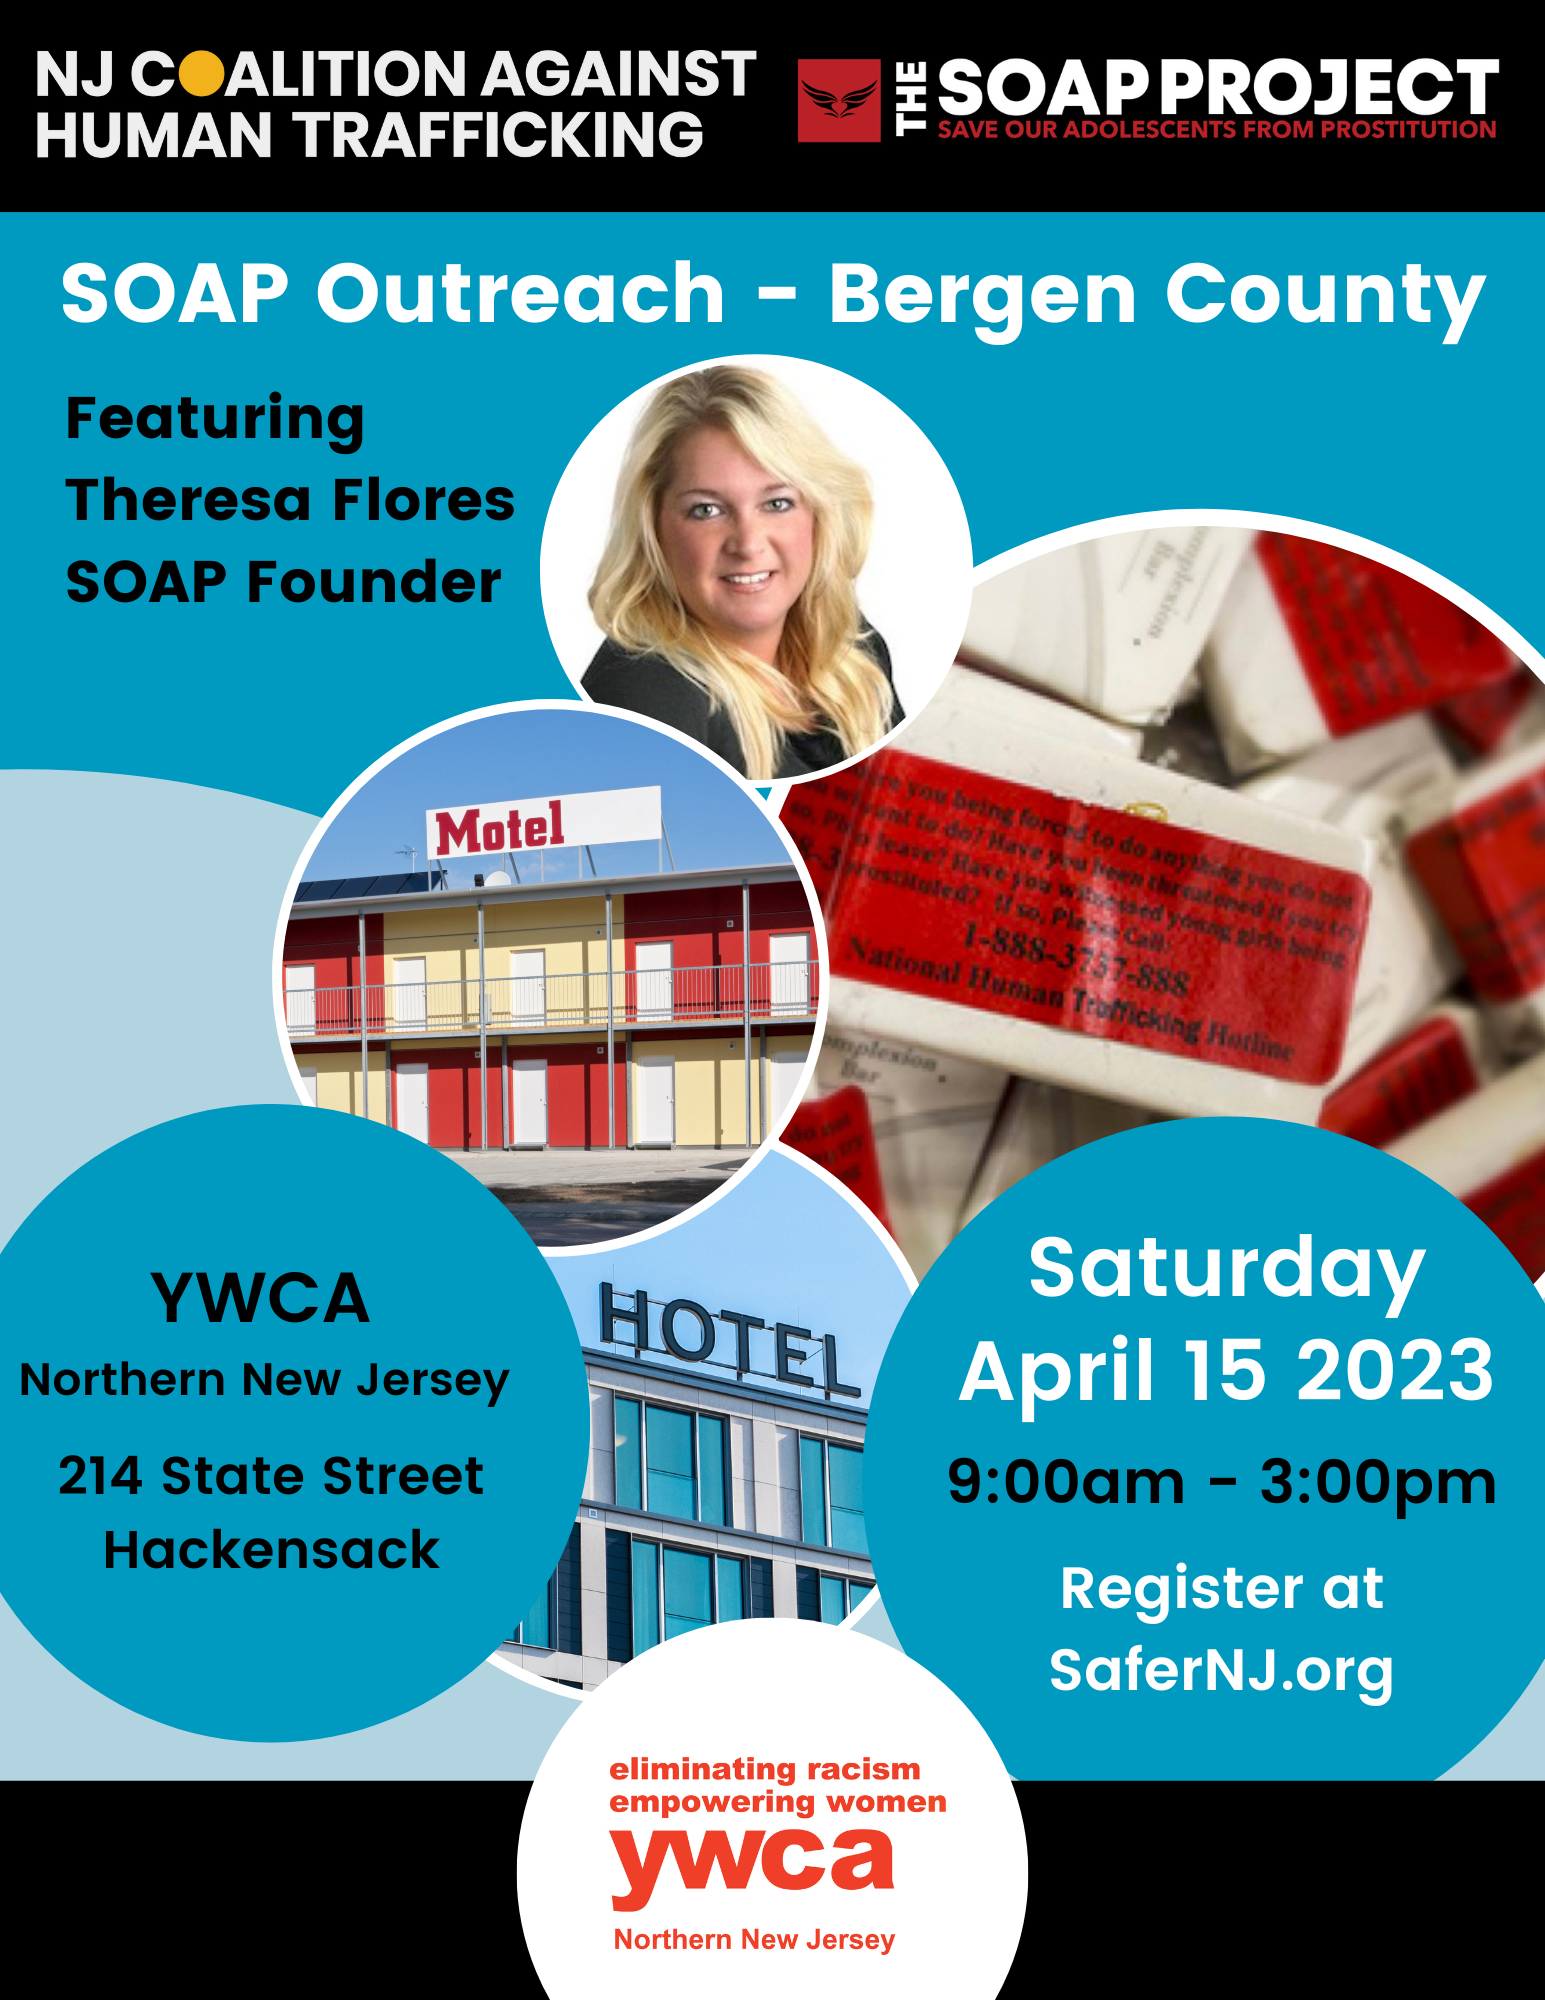 SOAP Outreach to Bergen County